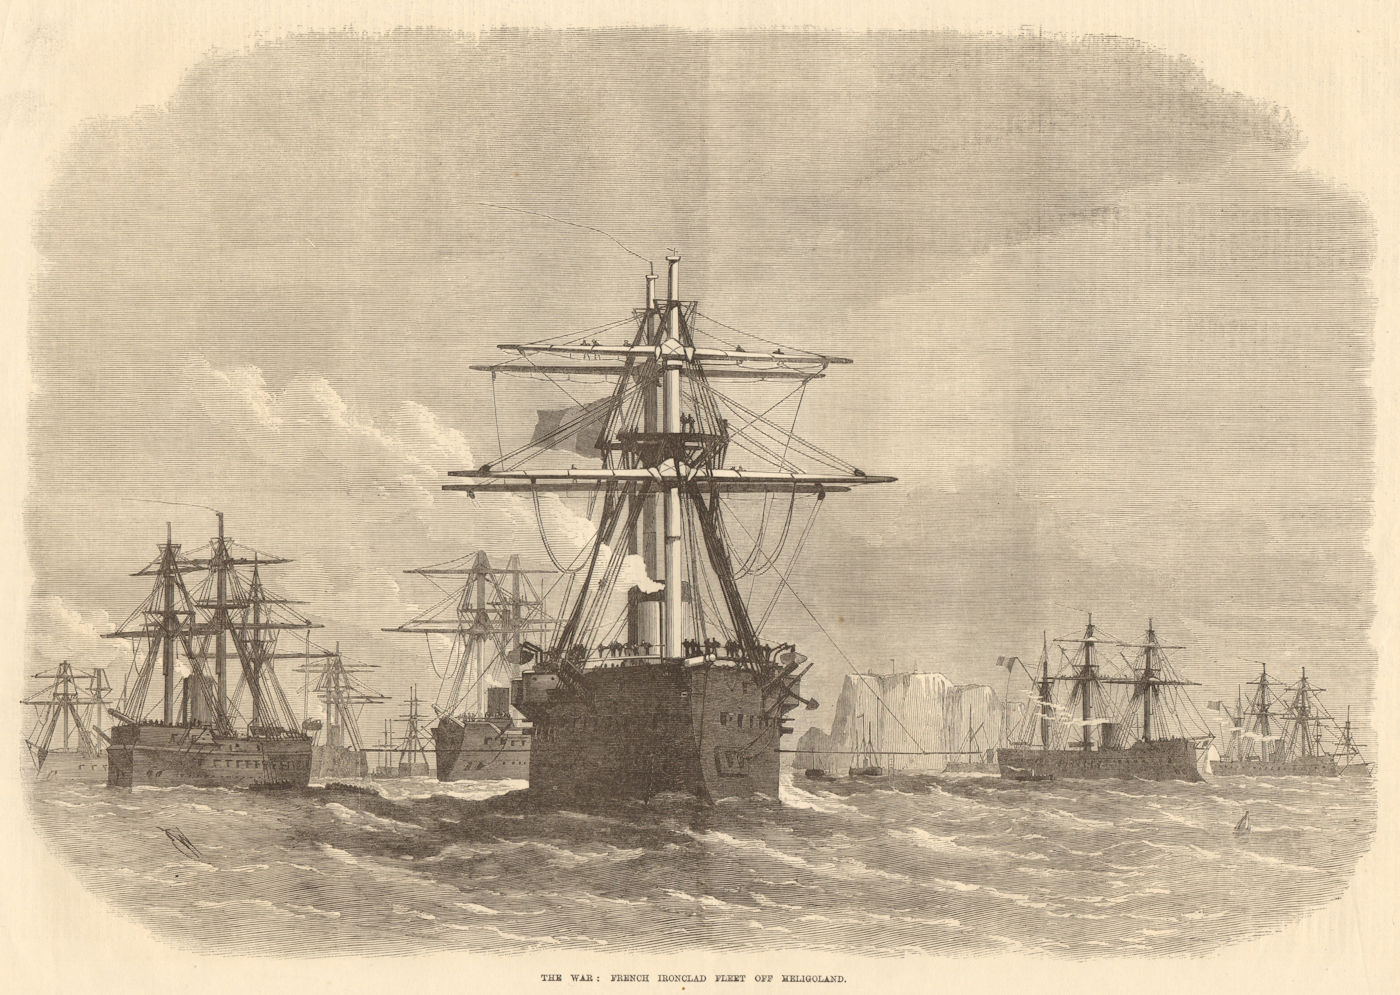 Associate Product The war: French ironclad fleet off Heligoland. Germany. Ships 1870 ILN print